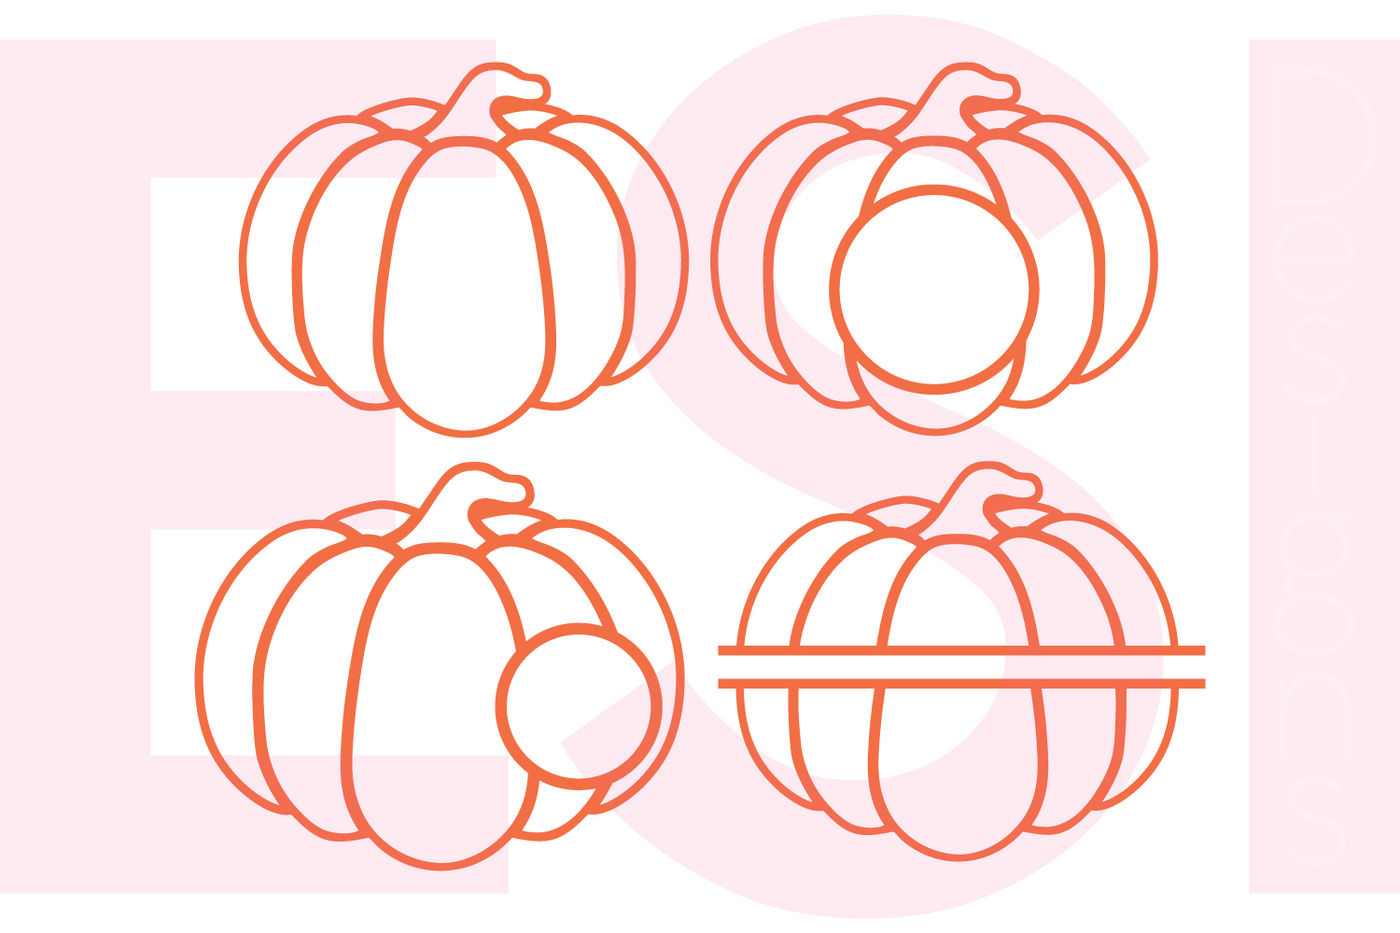 Download Pumpkin Outline Designs and Monogram Set - SVG, DXF, EPS, PNG - Cutting Files By ESI Designs ...